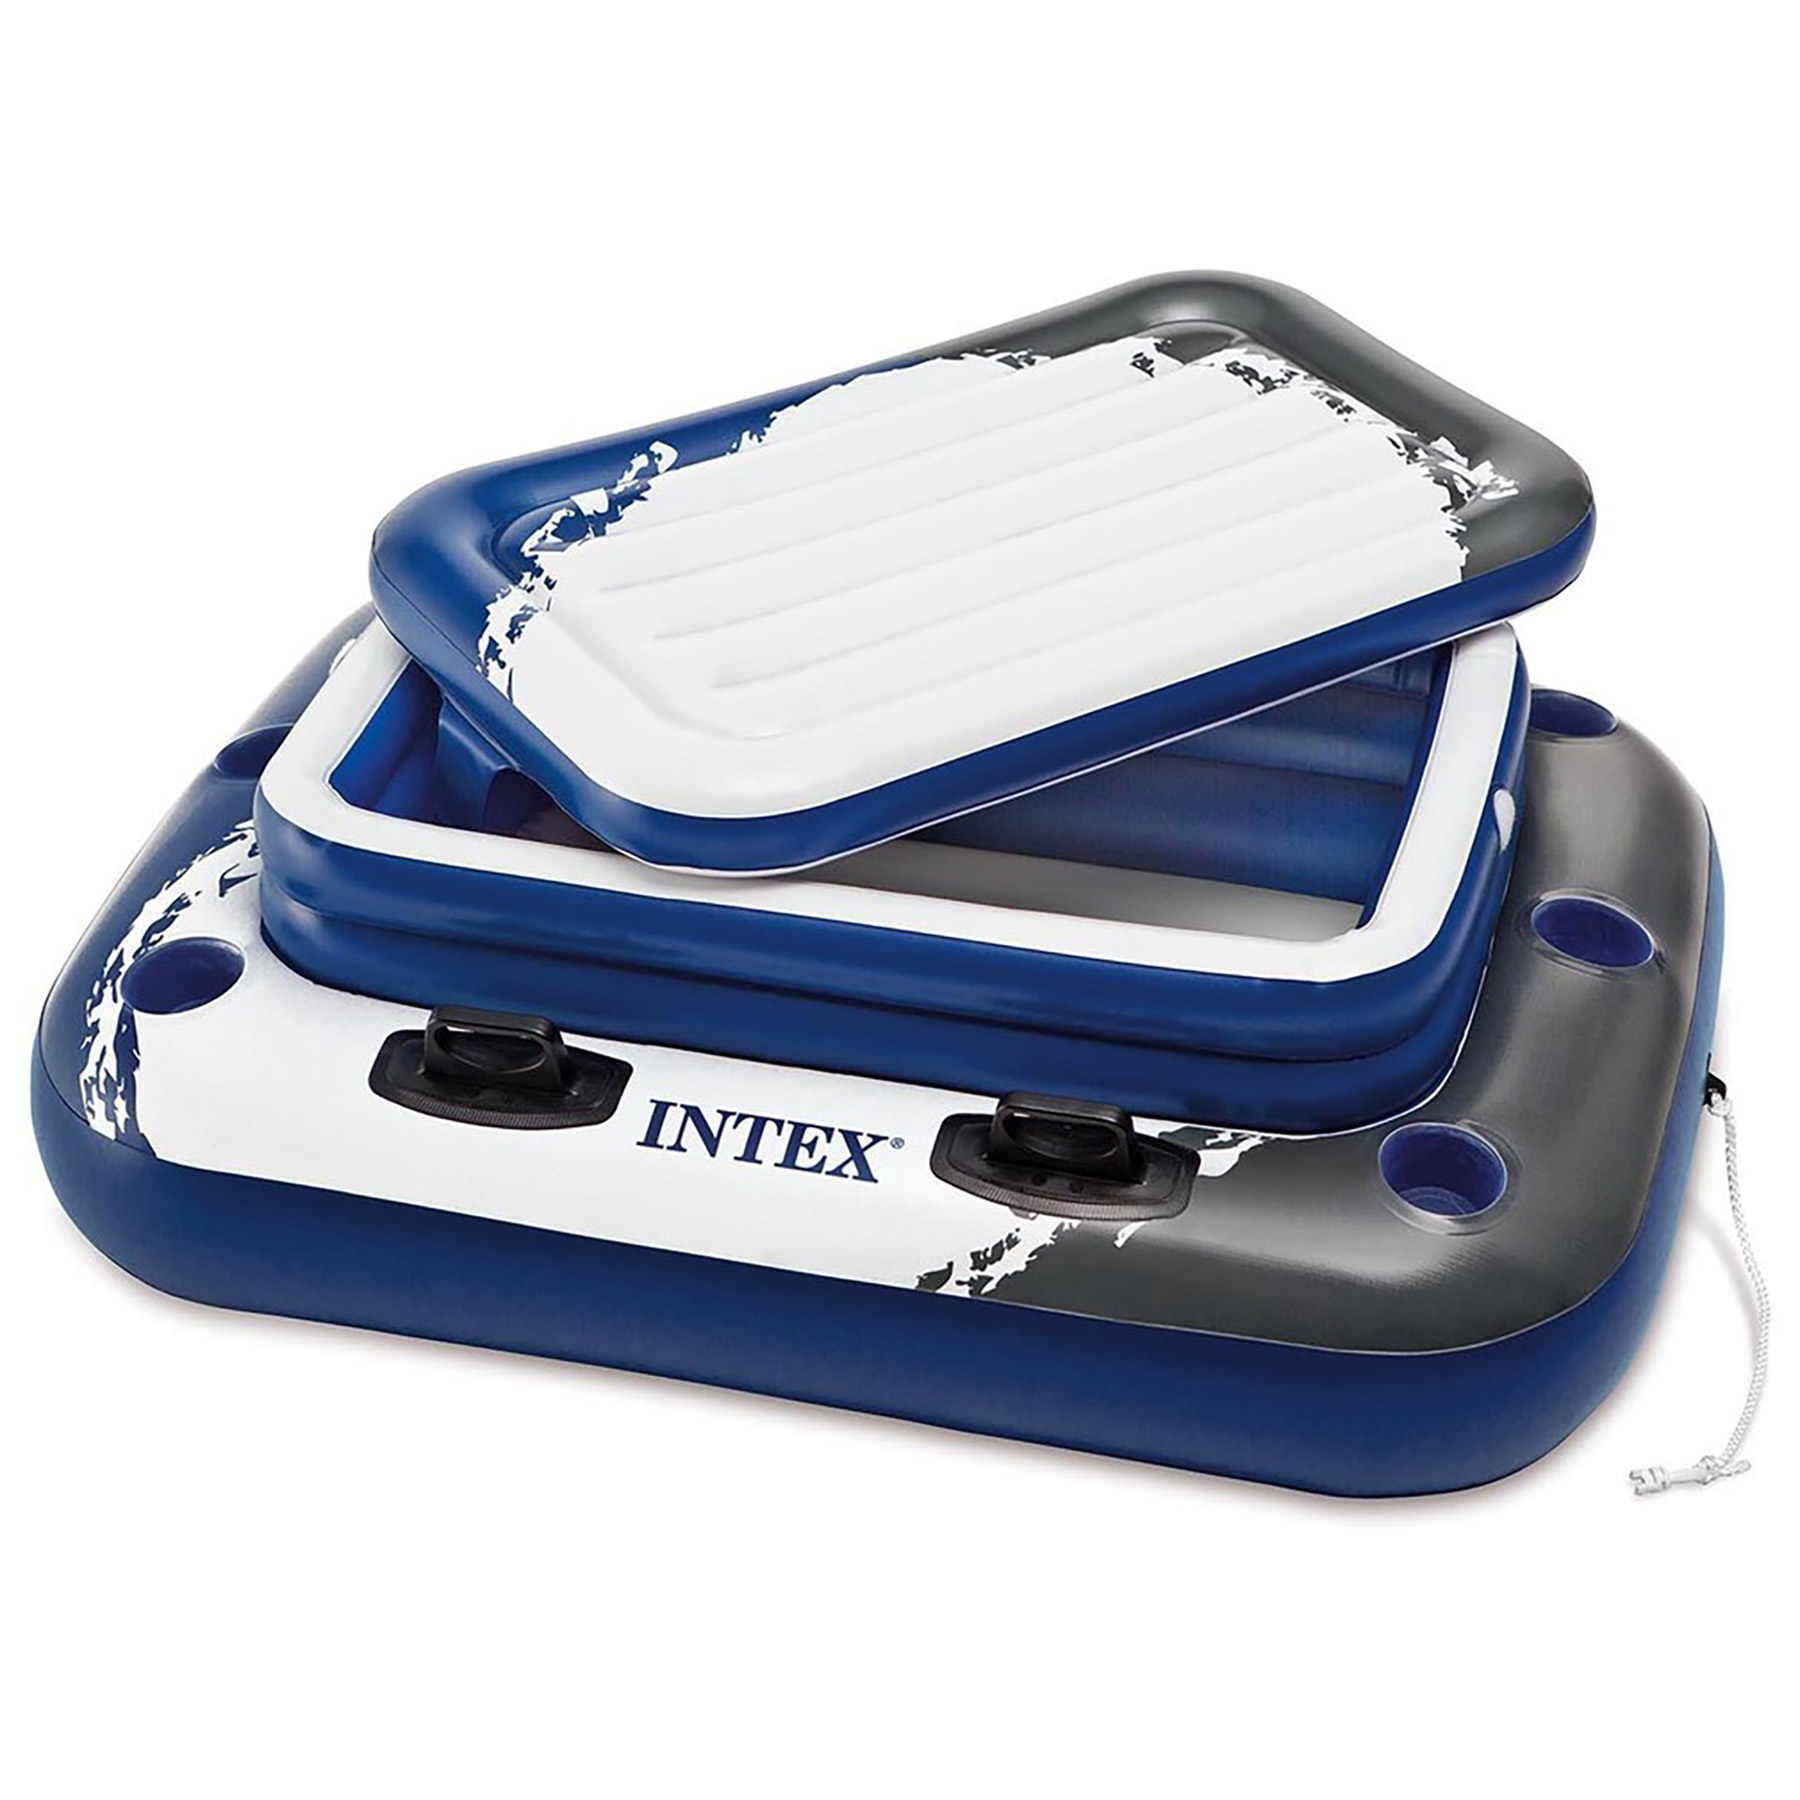 Intex Mega Chill 2 Inflatable Float For Water Use - image 1 of 5